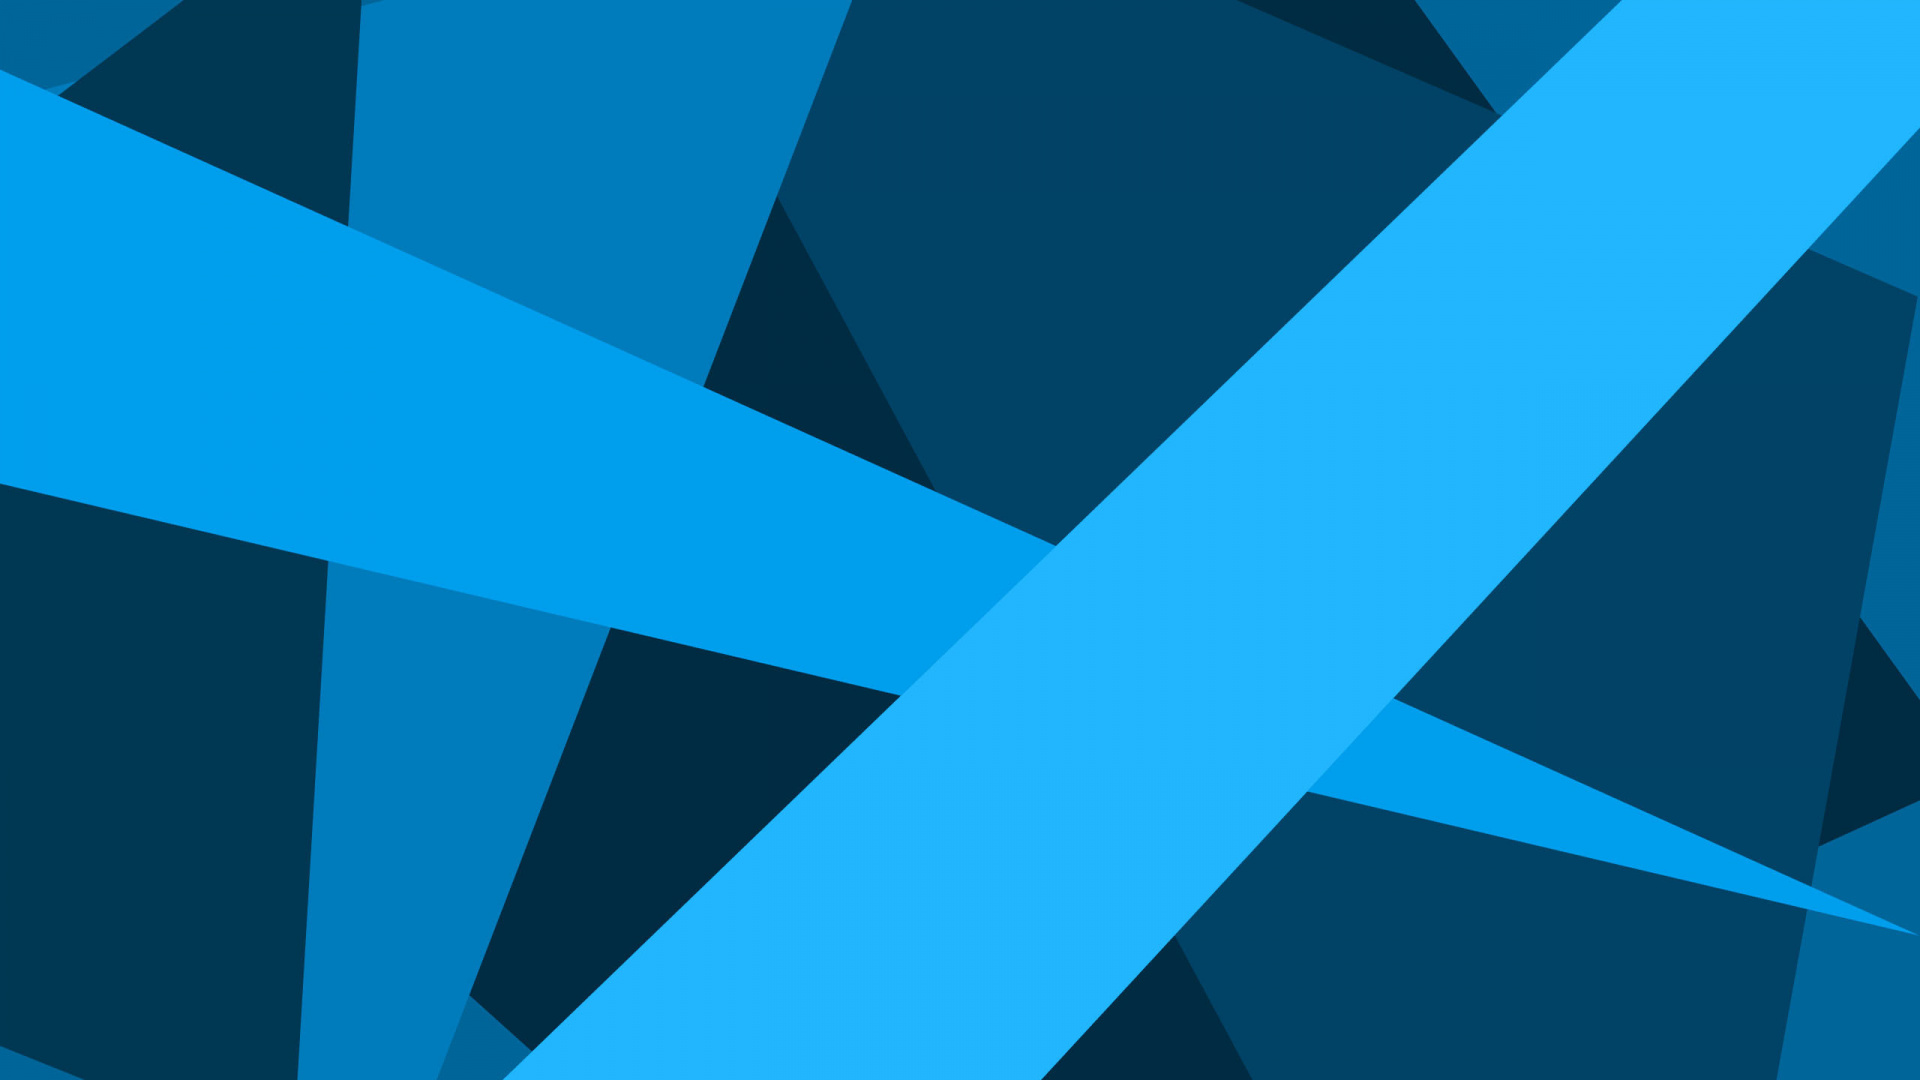 Blue and Black Triangle Illustration. Wallpaper in 1920x1080 Resolution